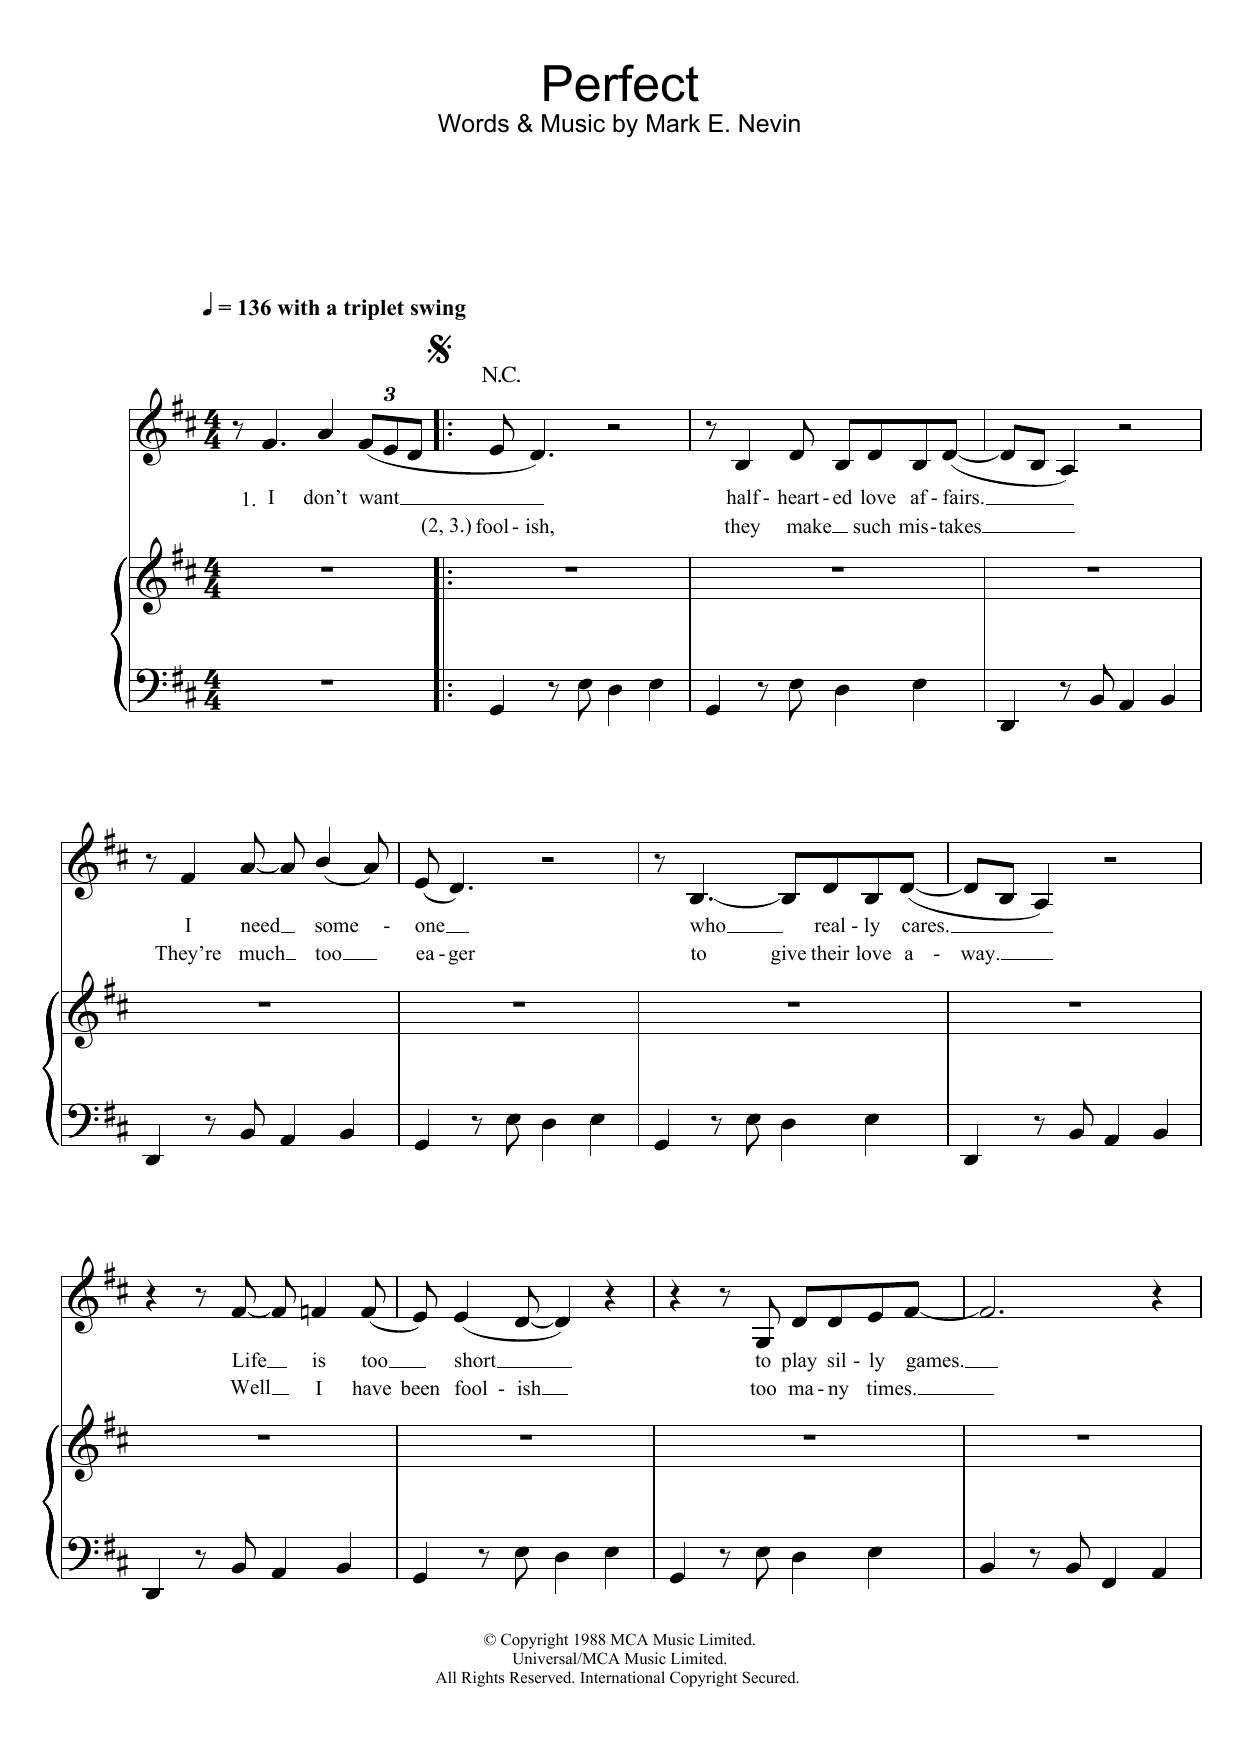 Download Fairground Attraction Perfect Sheet Music